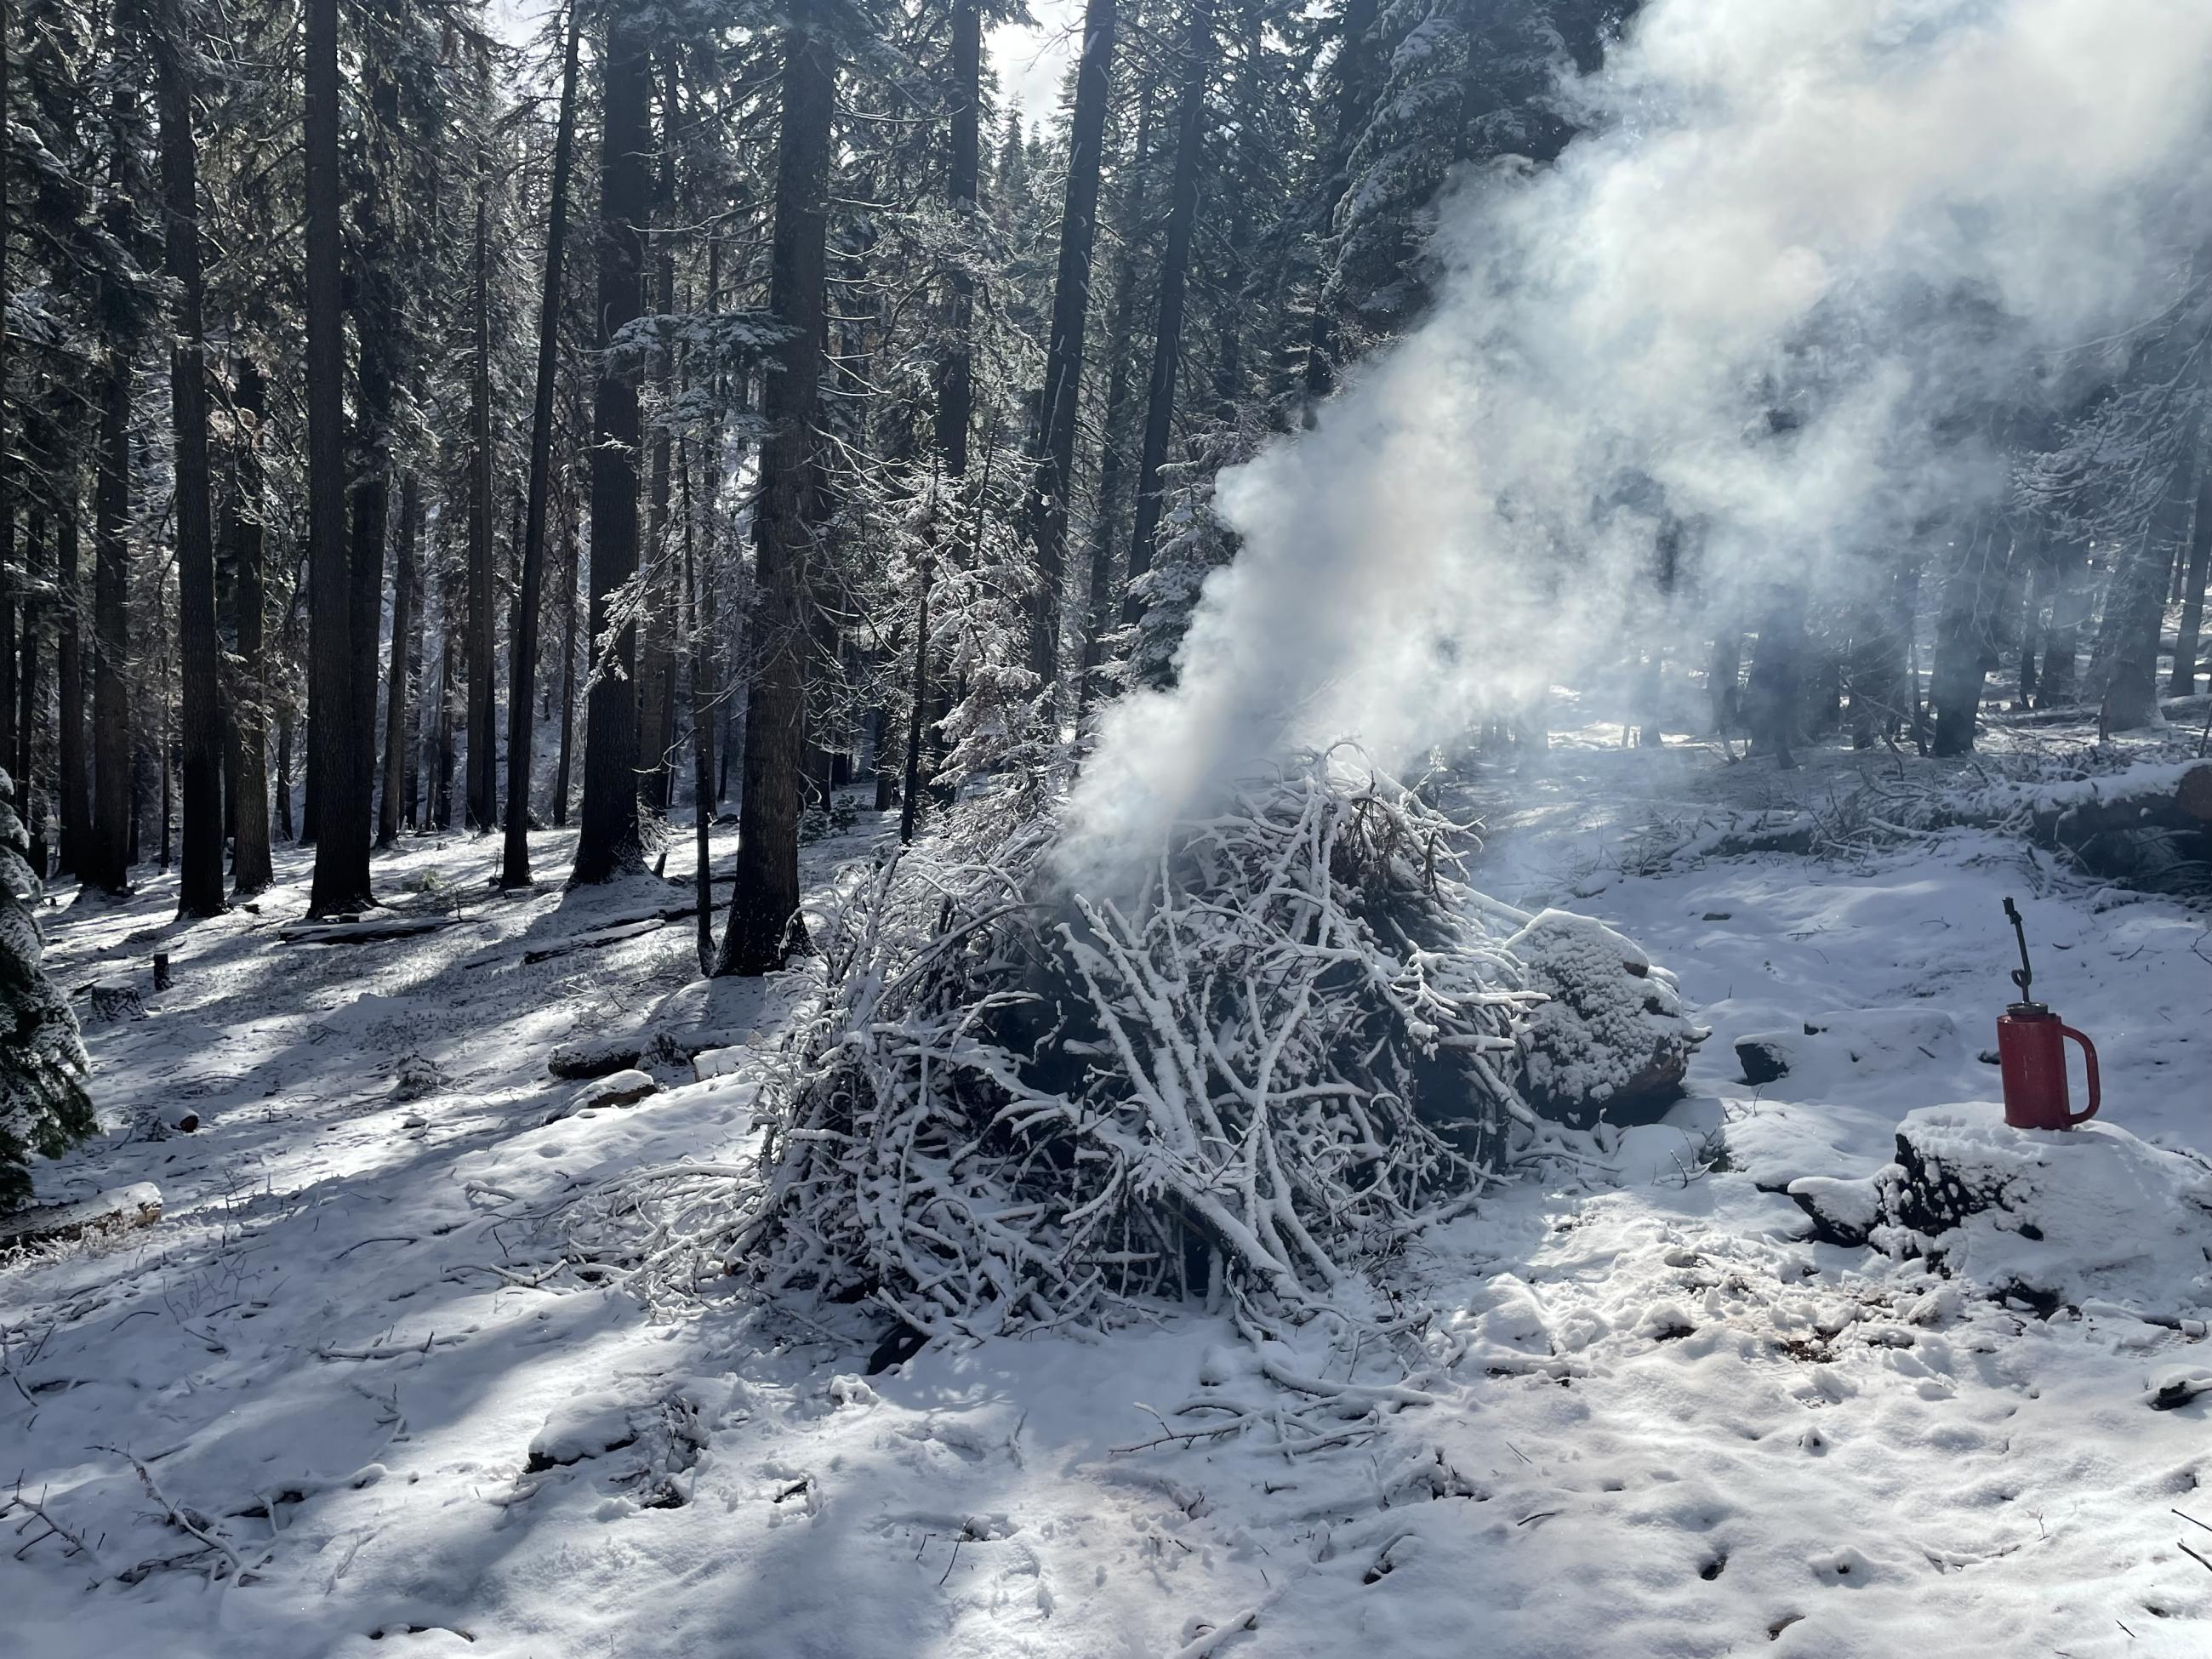 Pile burning in light snow at Snow Basin in Mendocino National Forest